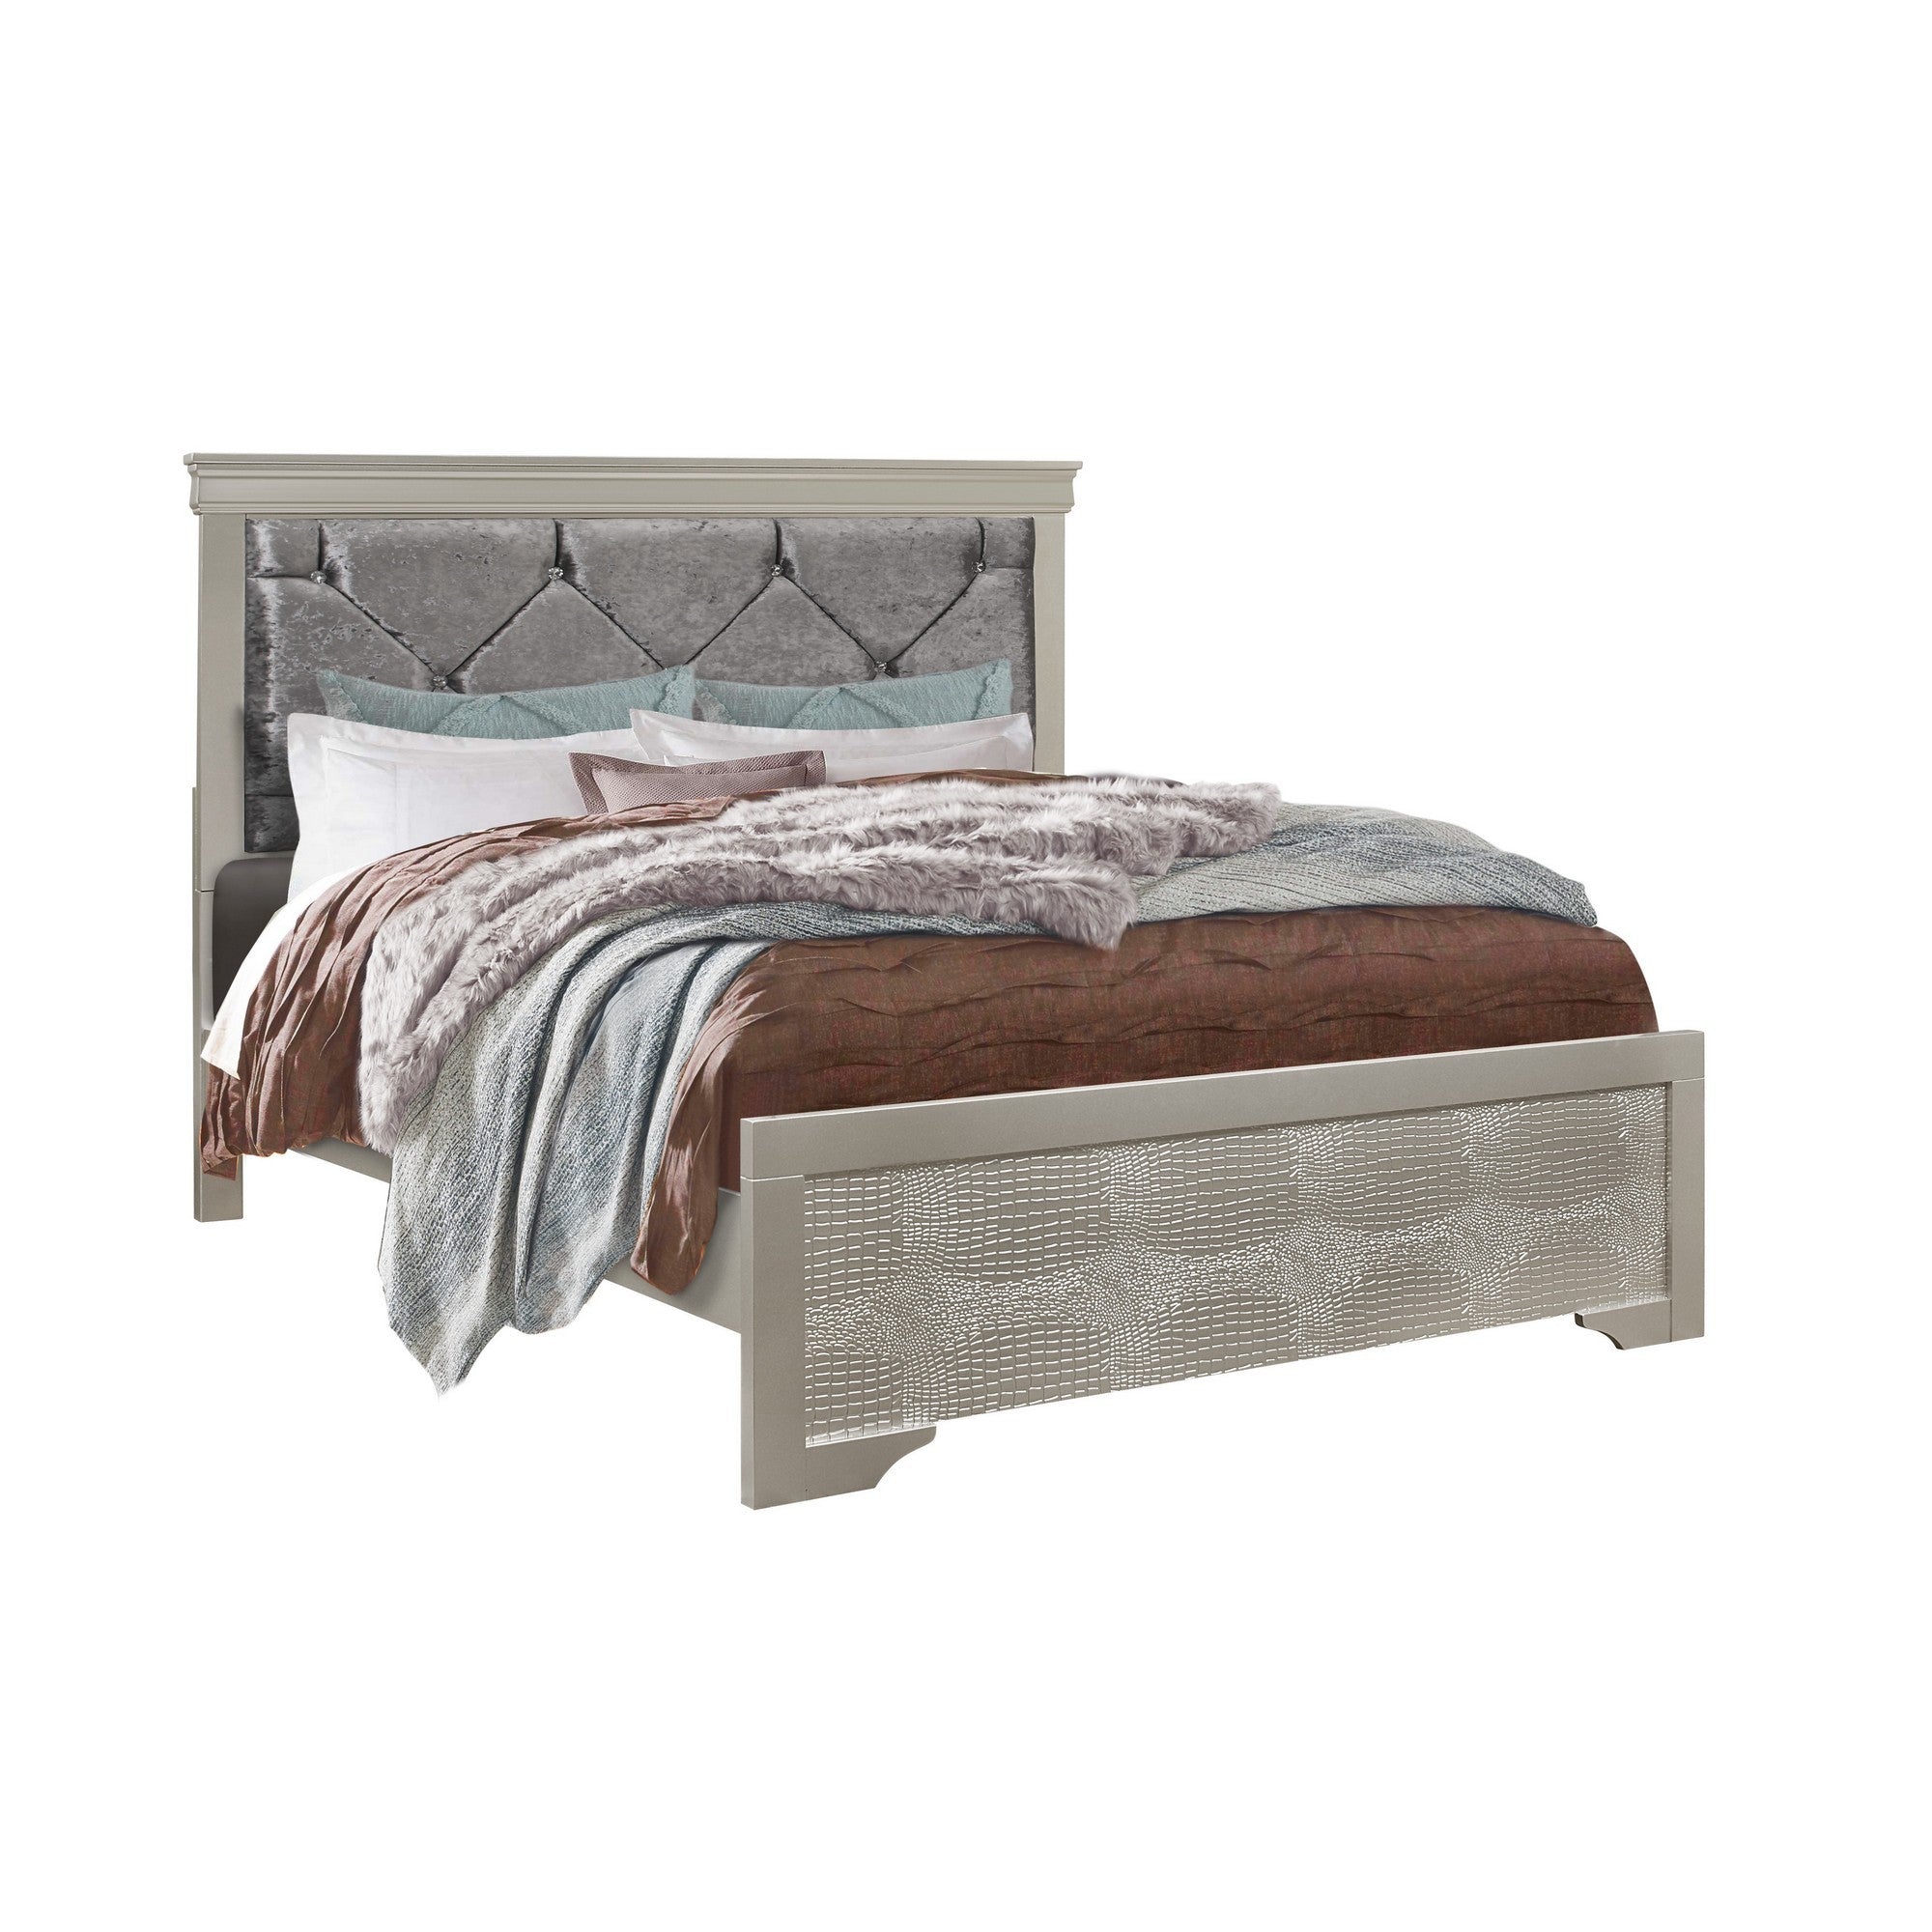 Silver Tone Rubberwood King Bed with Clean Line Headboard and Footboard Default Title